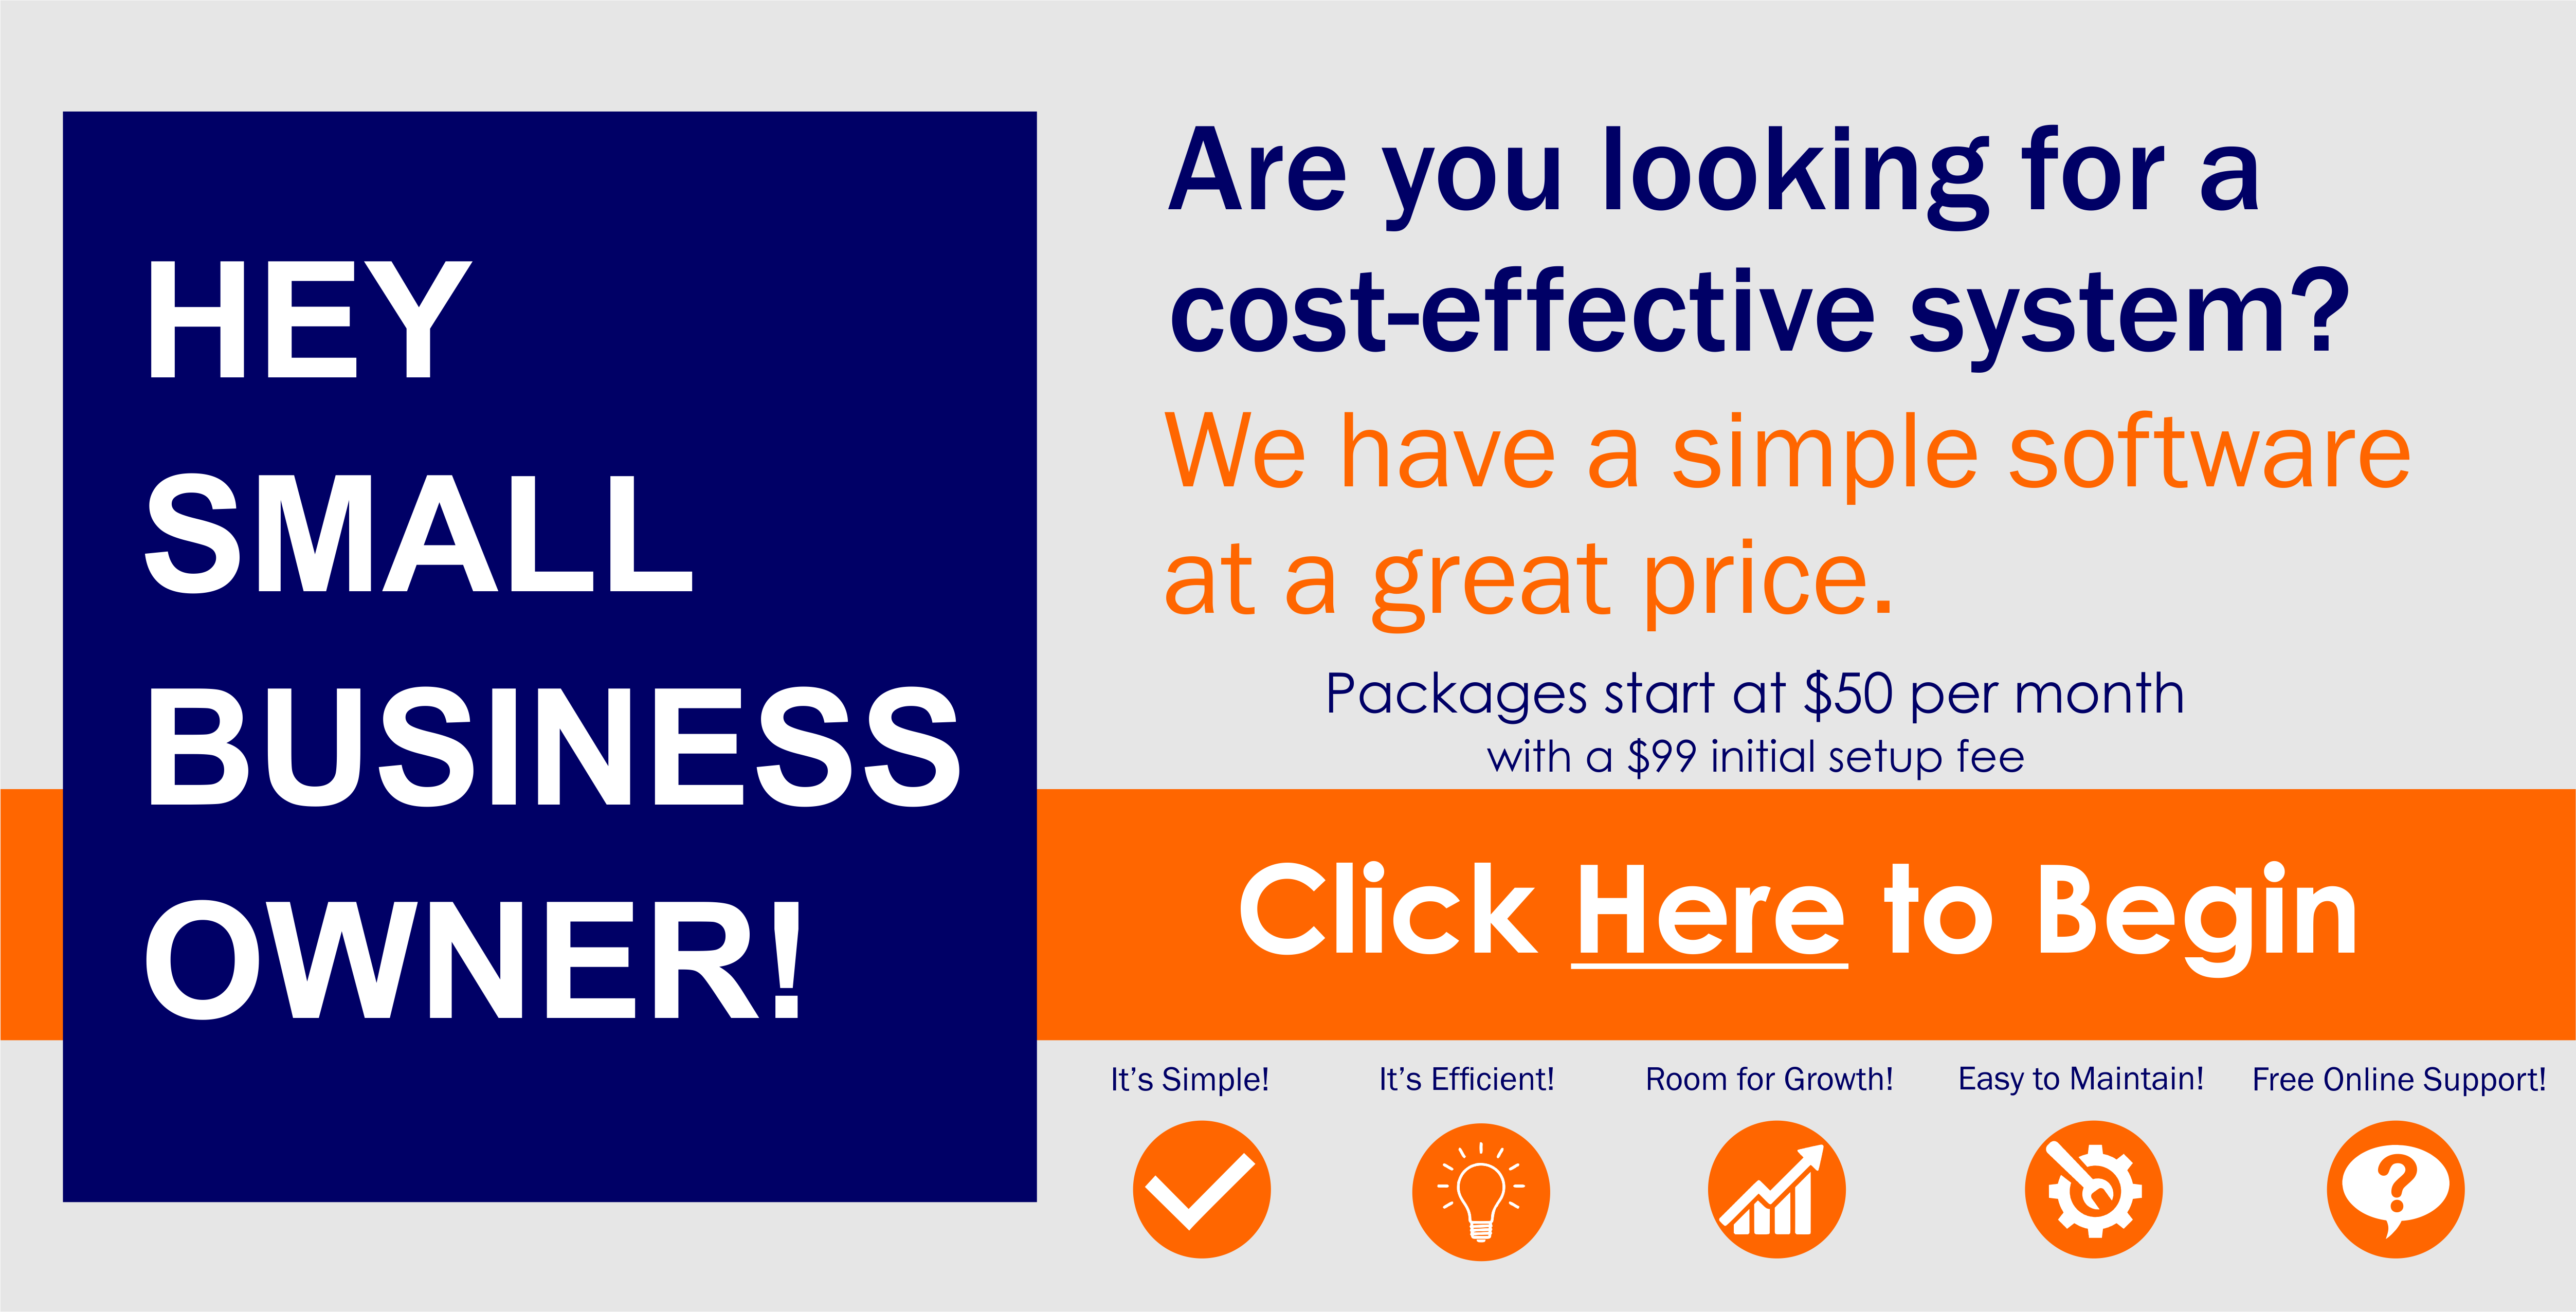 Hey Small Business Owner! Are you looking for a cost-effective system? We have a simple software at a great price. Click Here to Begin.